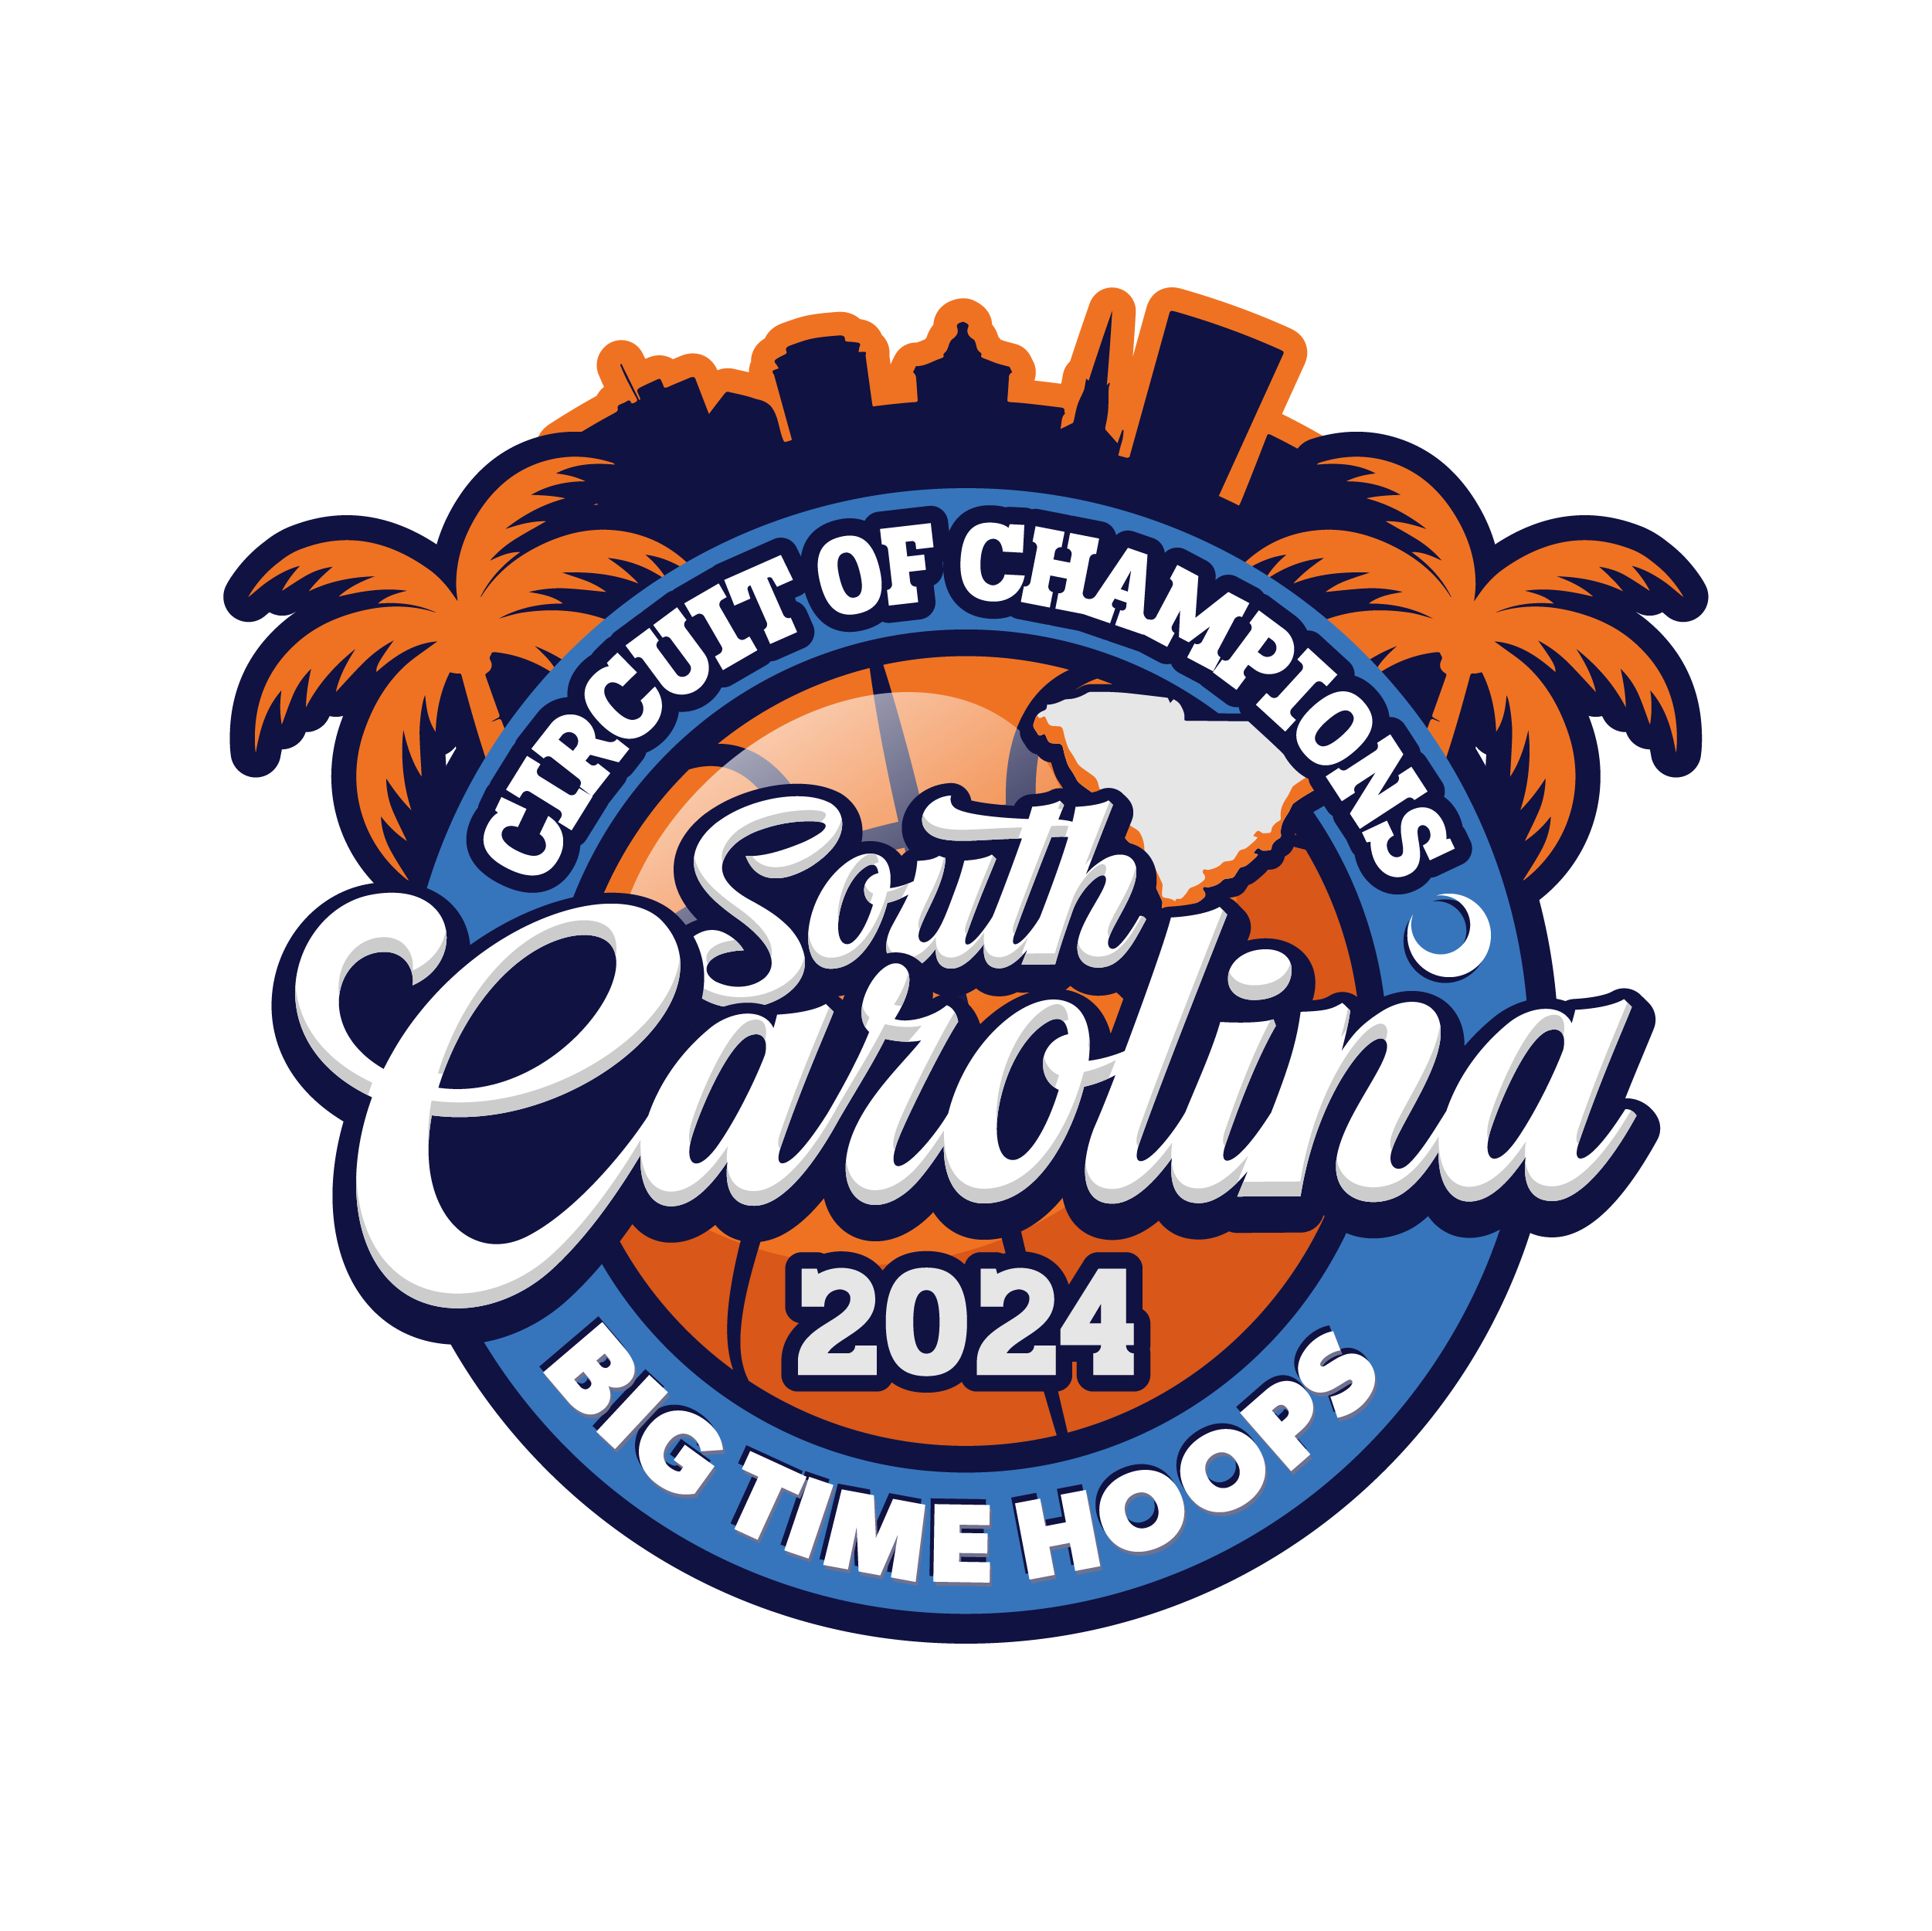 Circuit of champions in South Carolina by Big Time Hoops